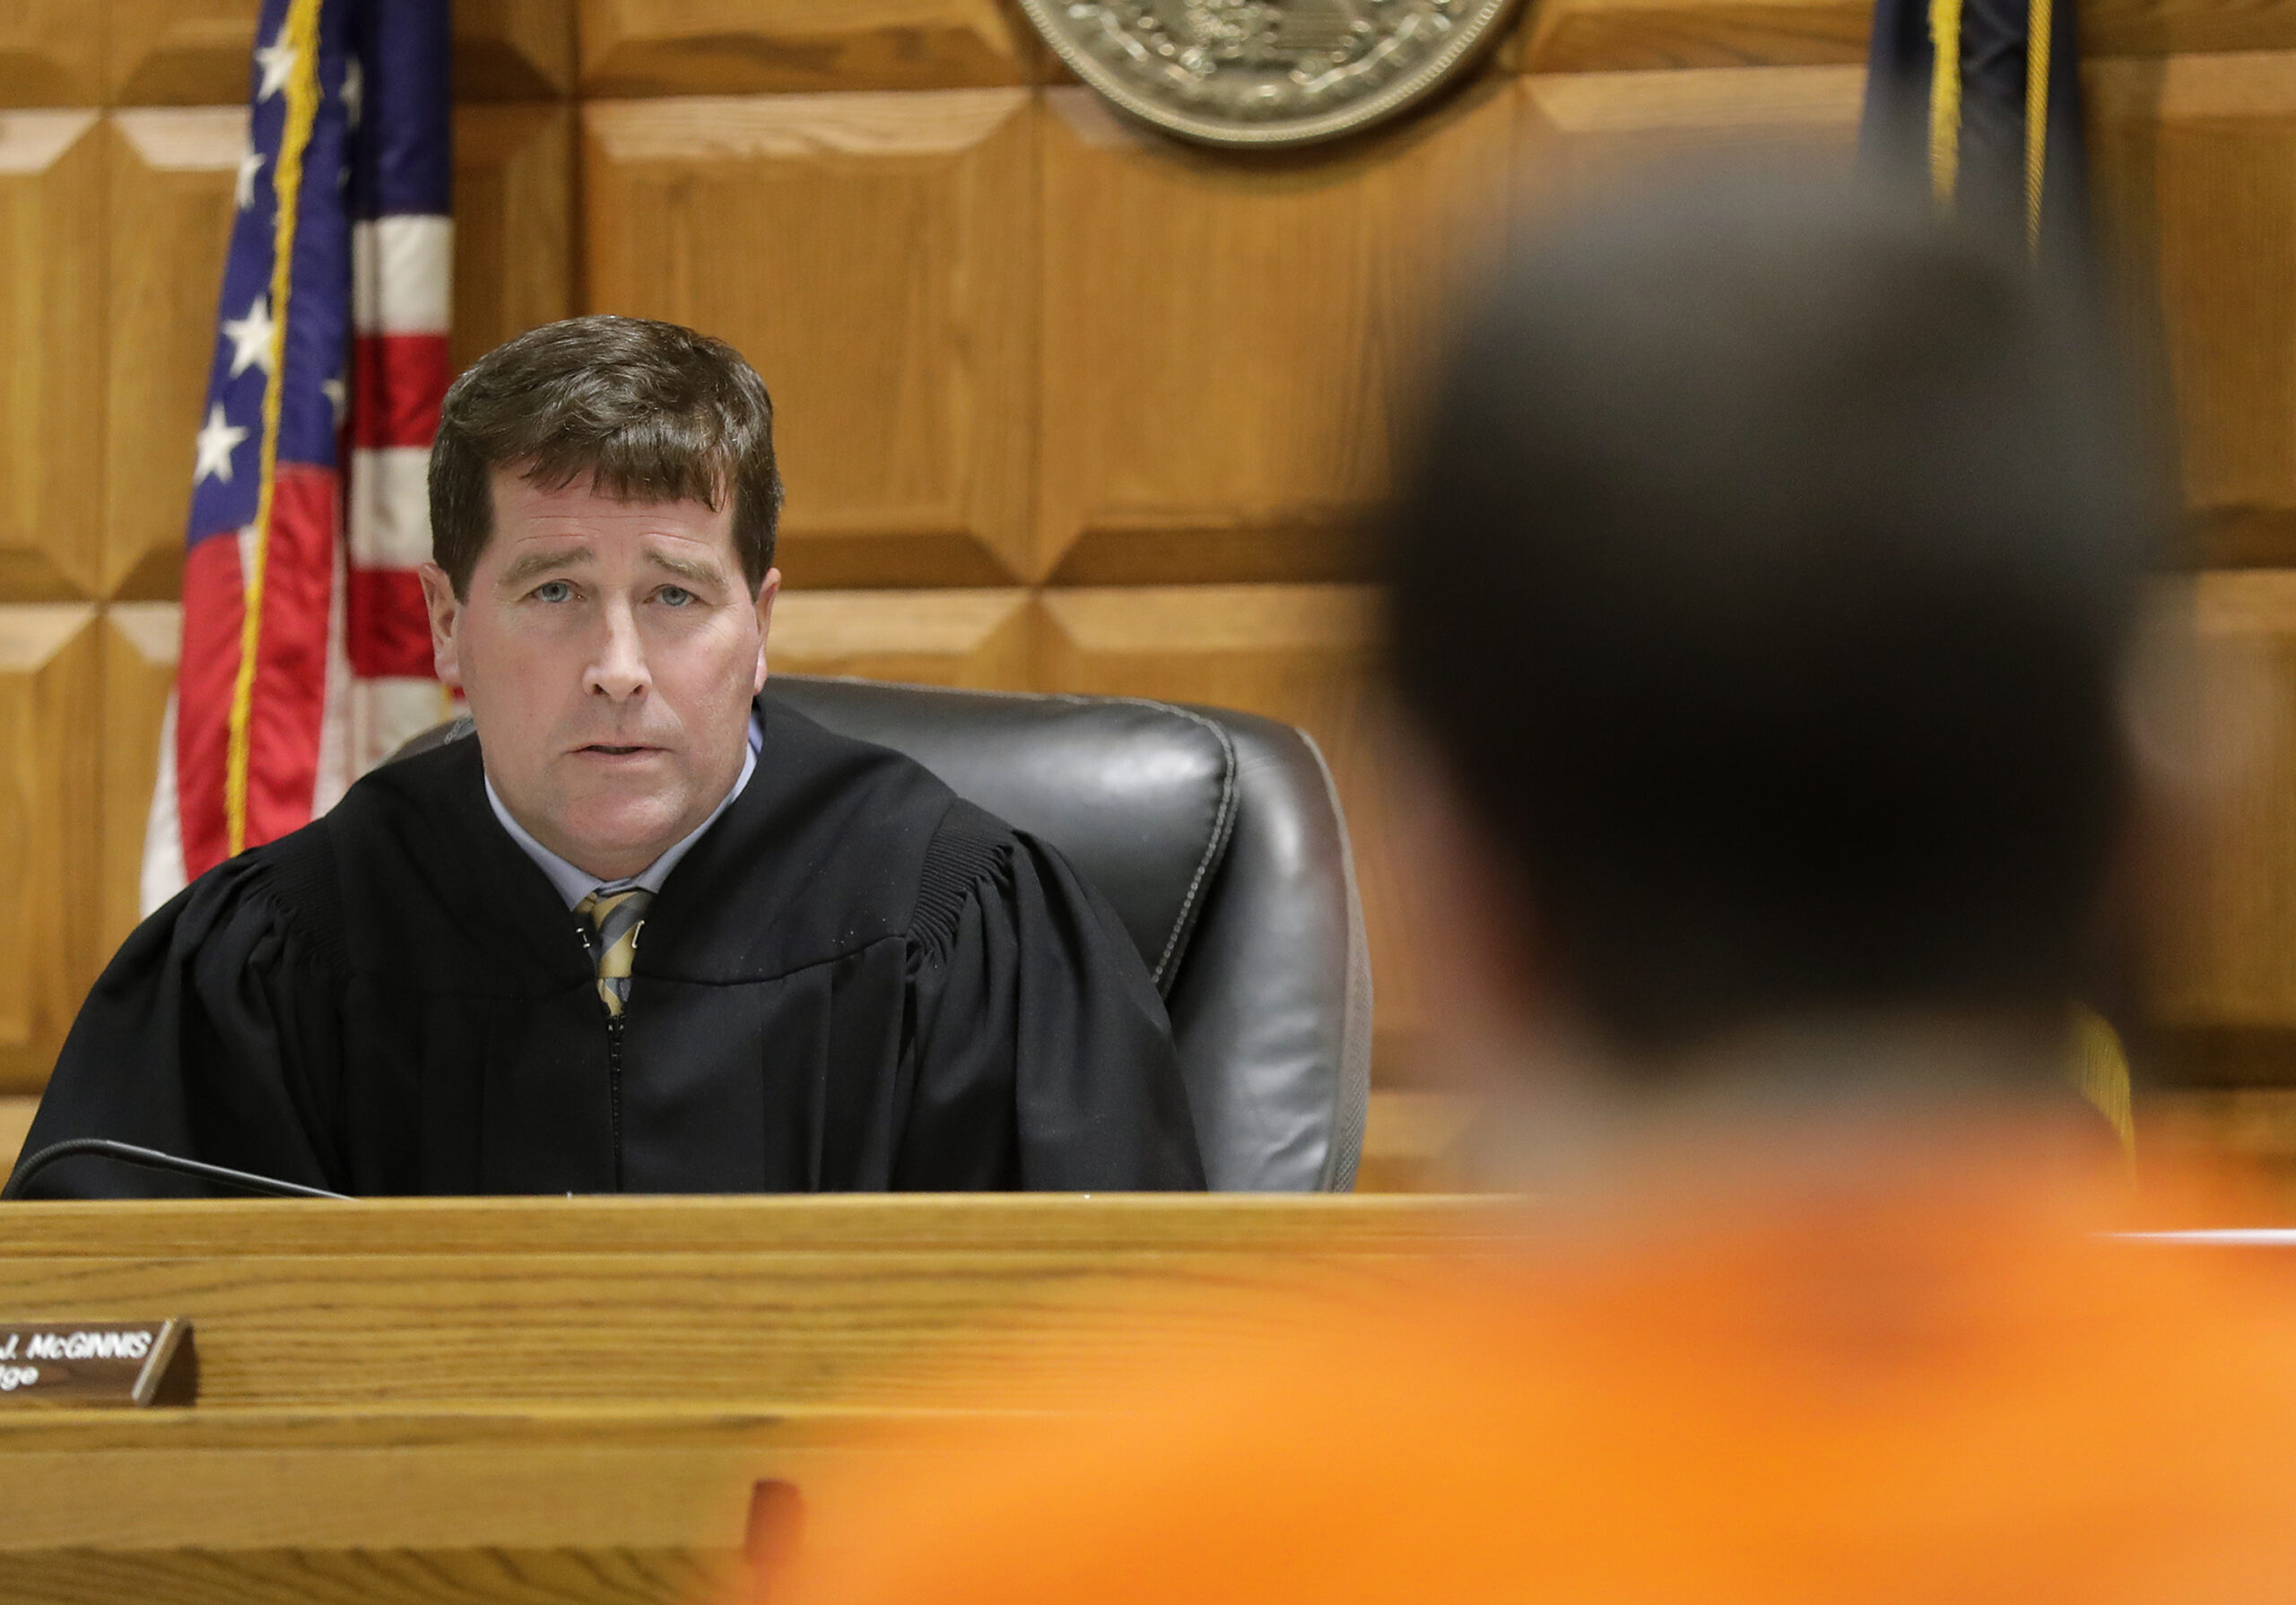 Wisconsin judge under investigation for jailing man over dispute with courthouse employee